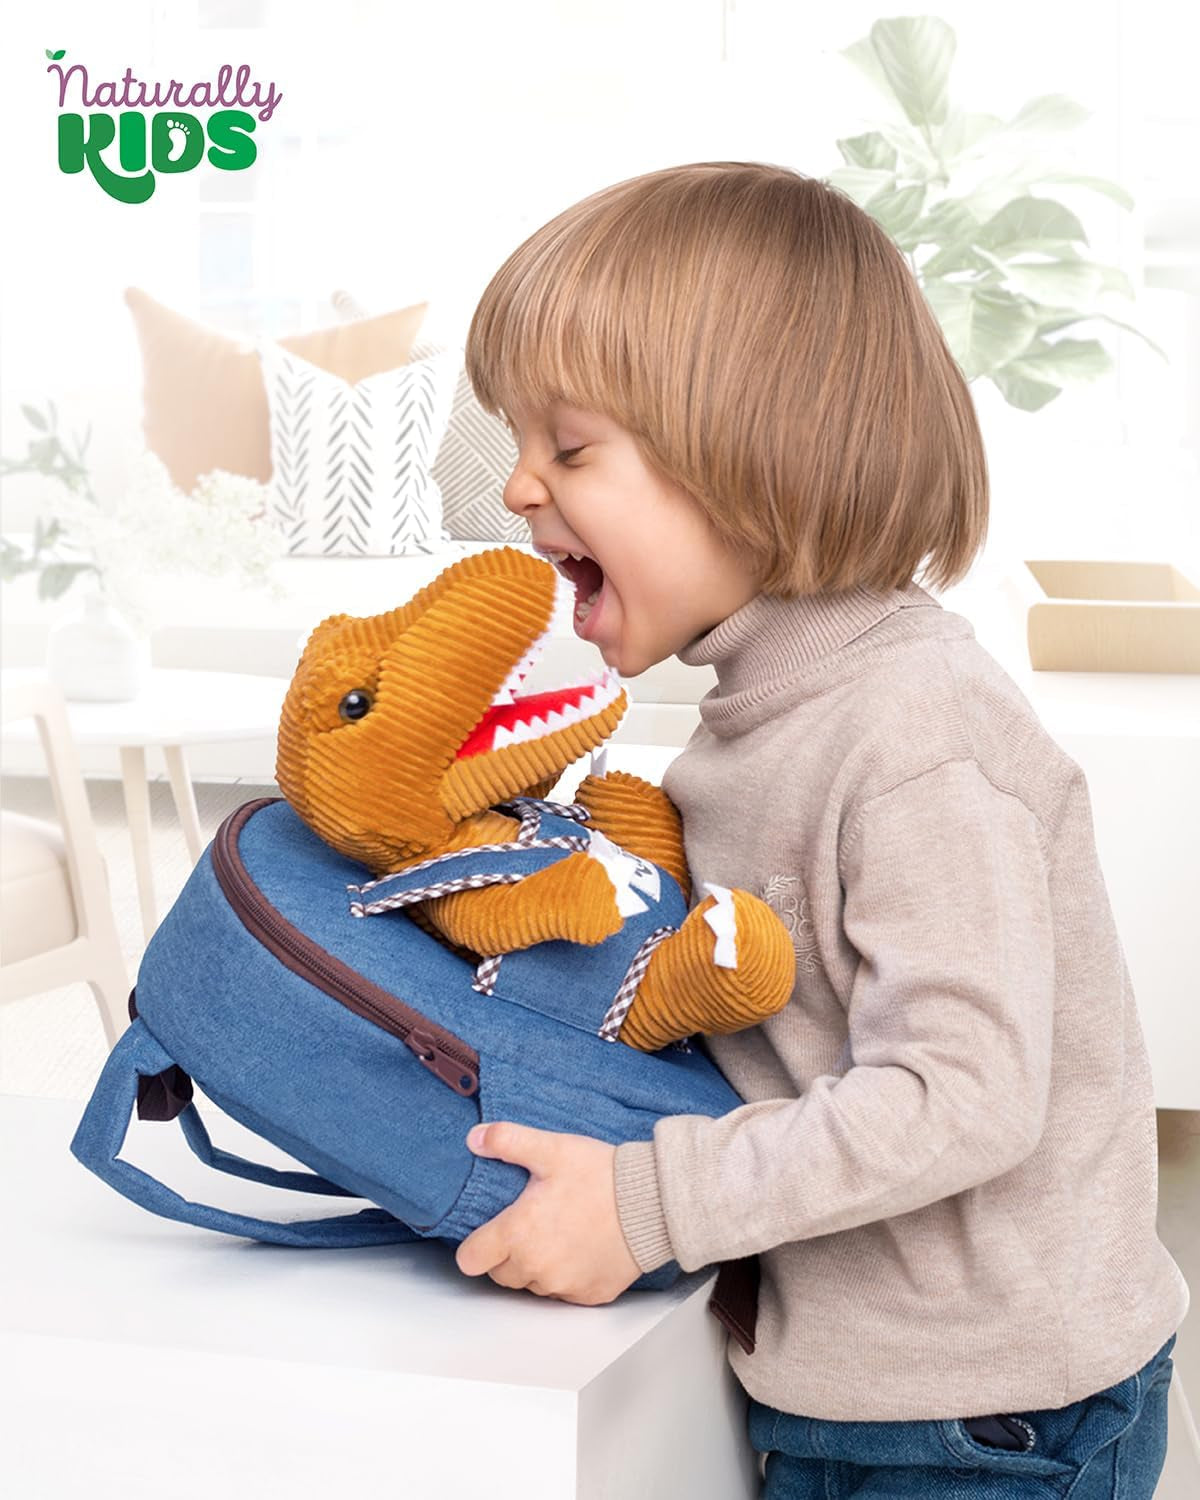 Tiny Dinosaur Backpack - Very Xx-Small Toddler Backpack Purse for Boys Girls - Dinosaur Toys for Kids Age 2 - Little Backpack W Brown Plush T Rex